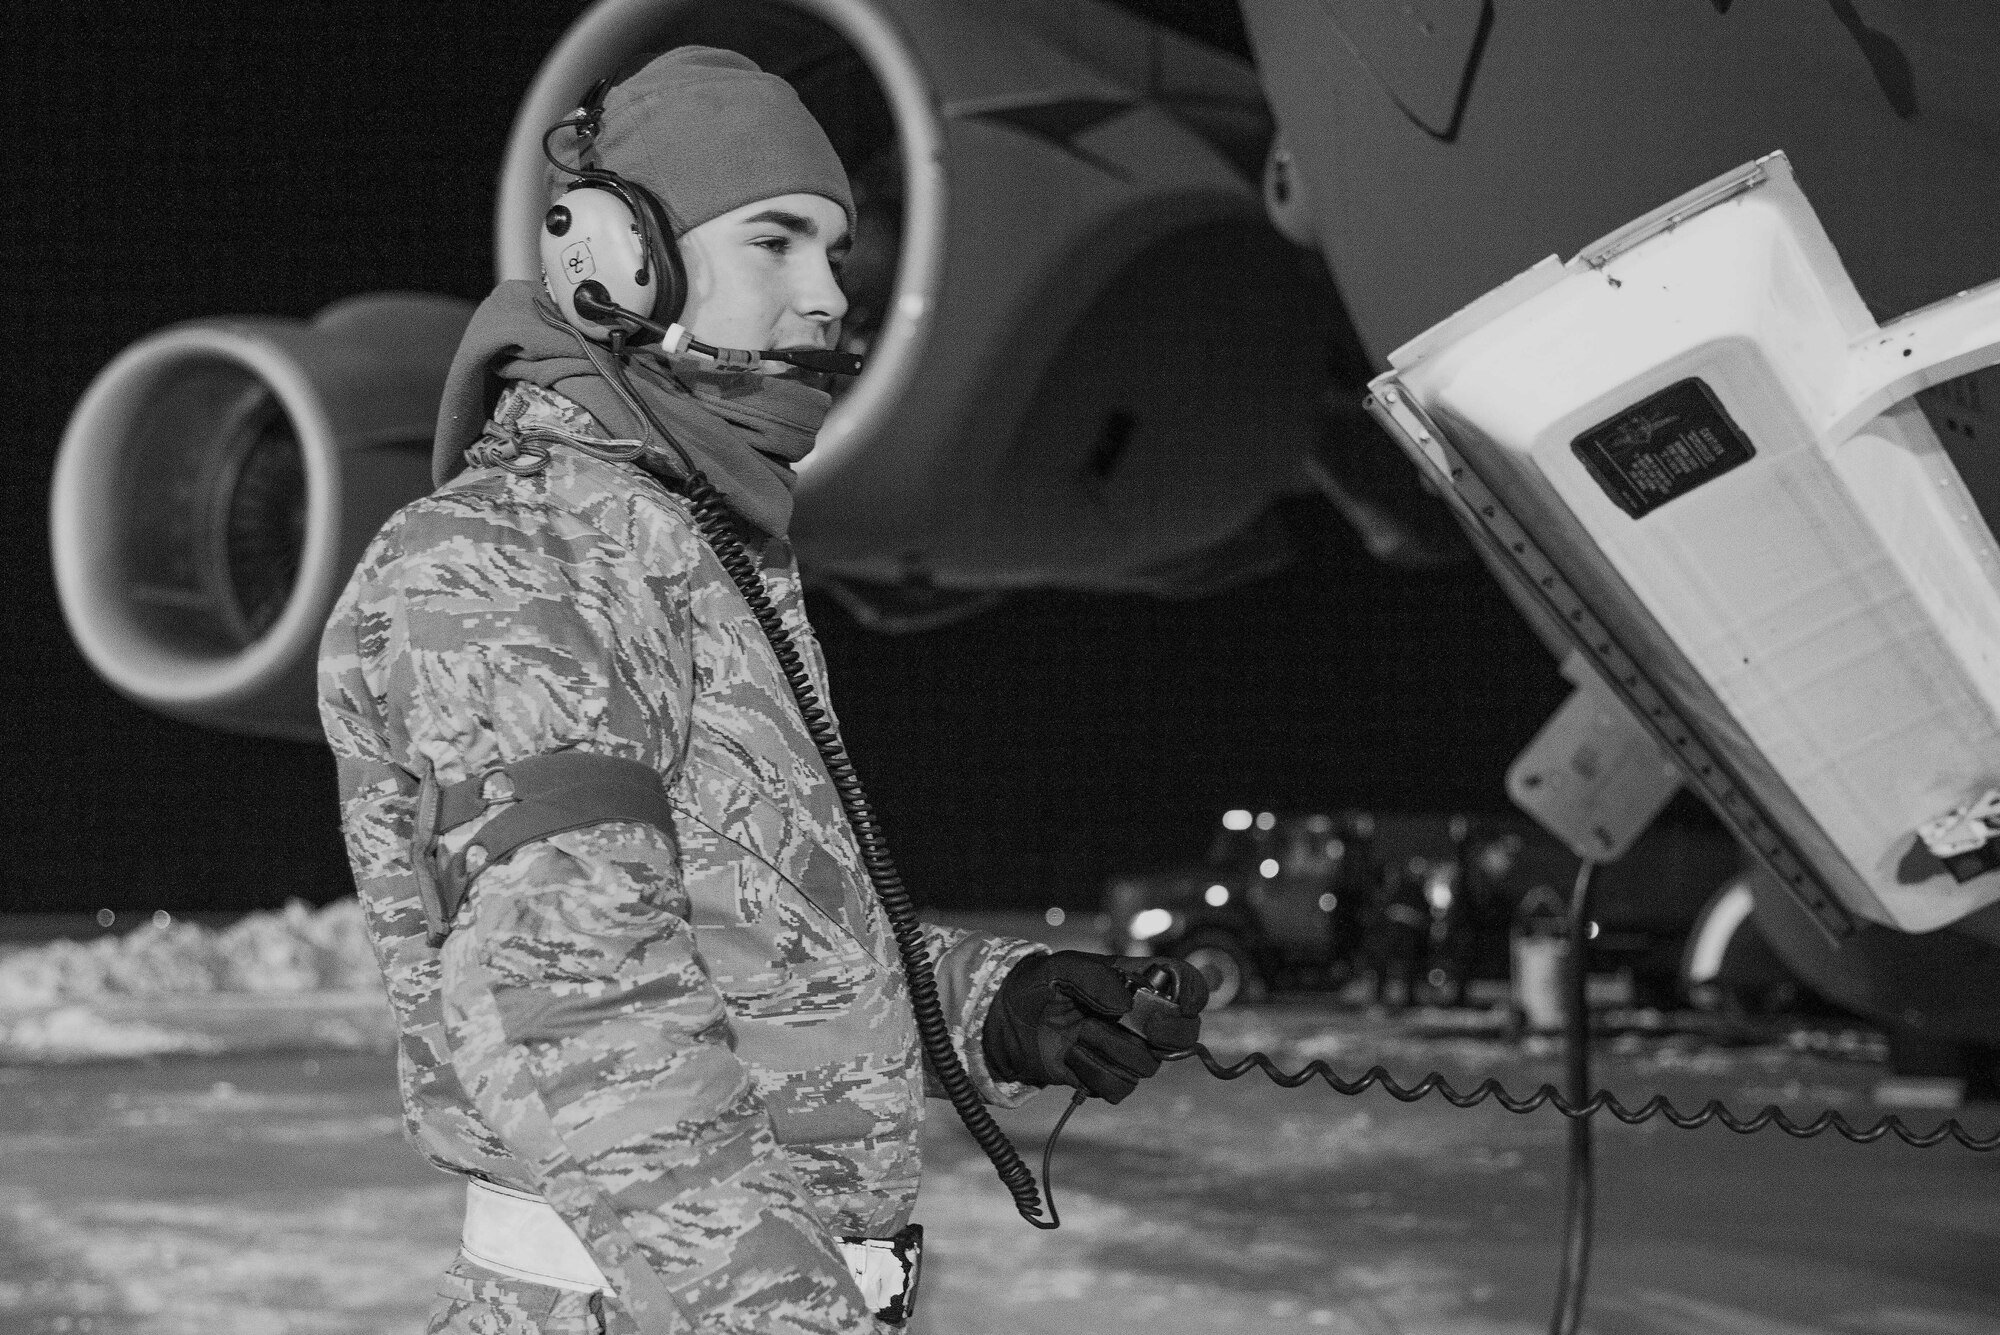 Senior Airman Garrett Battle, 736th Aircraft Maintenance Squadron communication and navigation journeyman, stands near the nose of a C-17A Globemaster III as the aircraft is being refueled, Jan. 5, 2018, at Dover Air Force Base, Del. Battle and other 736th AMXS maintainers prepared the aircraft for a mission in temperatures in the low teens and blowing snow from a steady 15 mile per hour wind. (U.S. Air Force photo by Roland Balik)